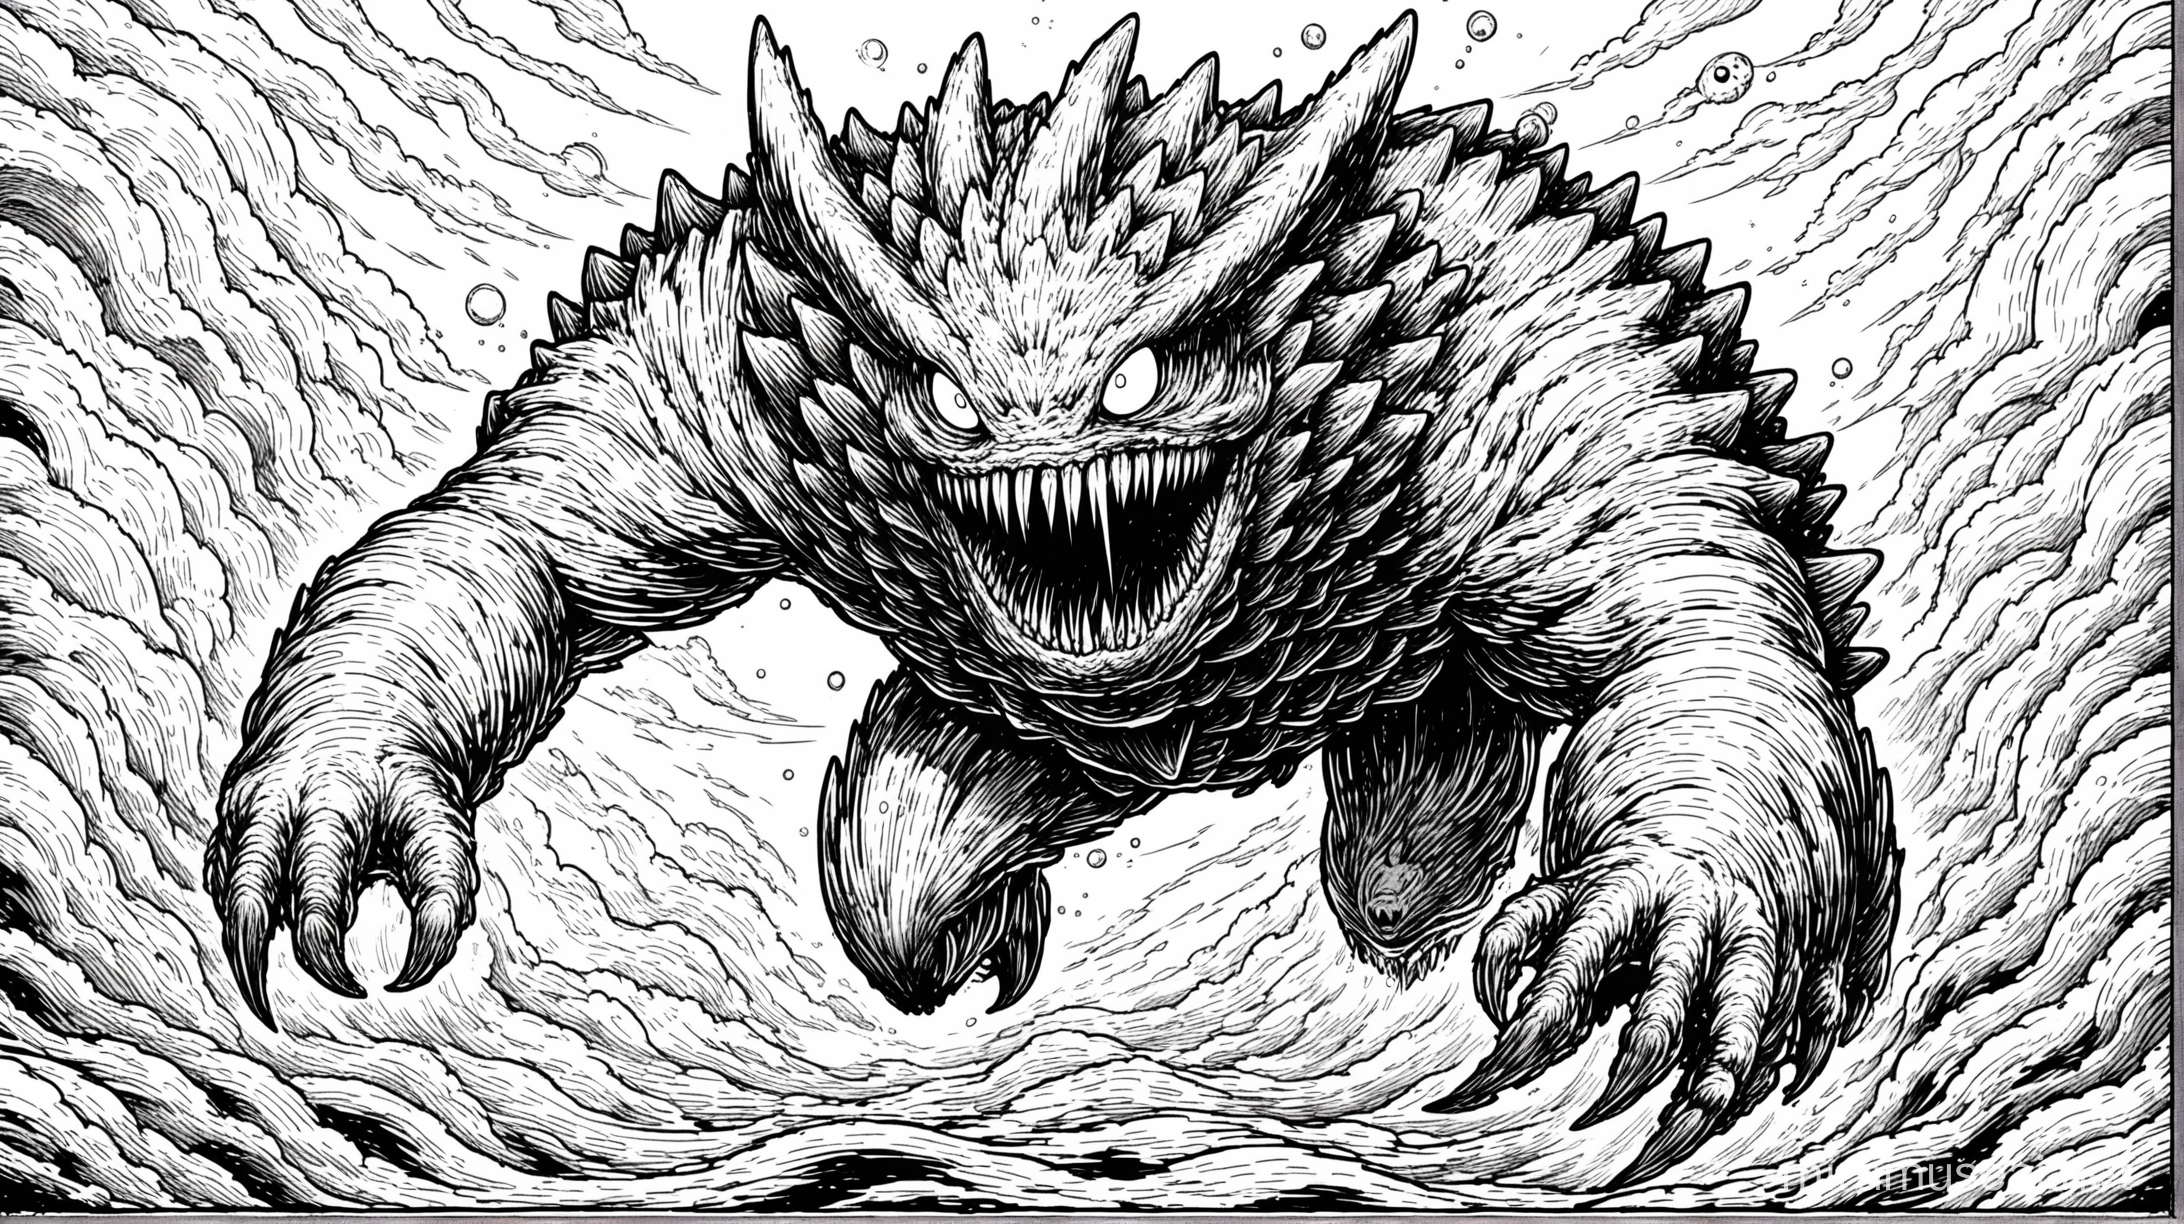 The Creature From Dimension 13, Black and white, thick line, no detail, no shading